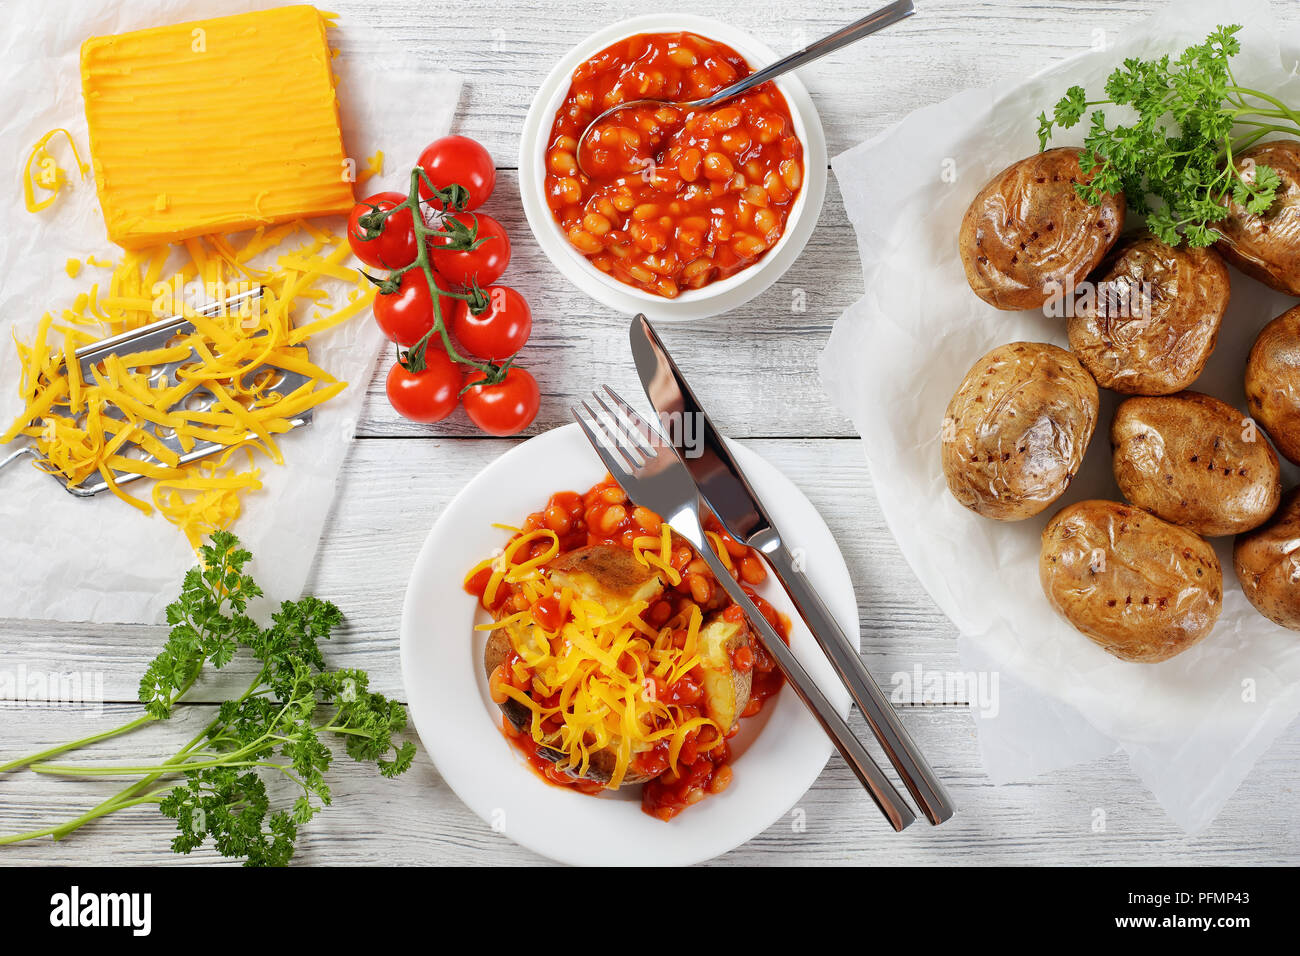 Baked Jacket Potato With Baked Beans And grated Cheese filling on white plate on wooden table with ingredients at background, view from above Stock Photo